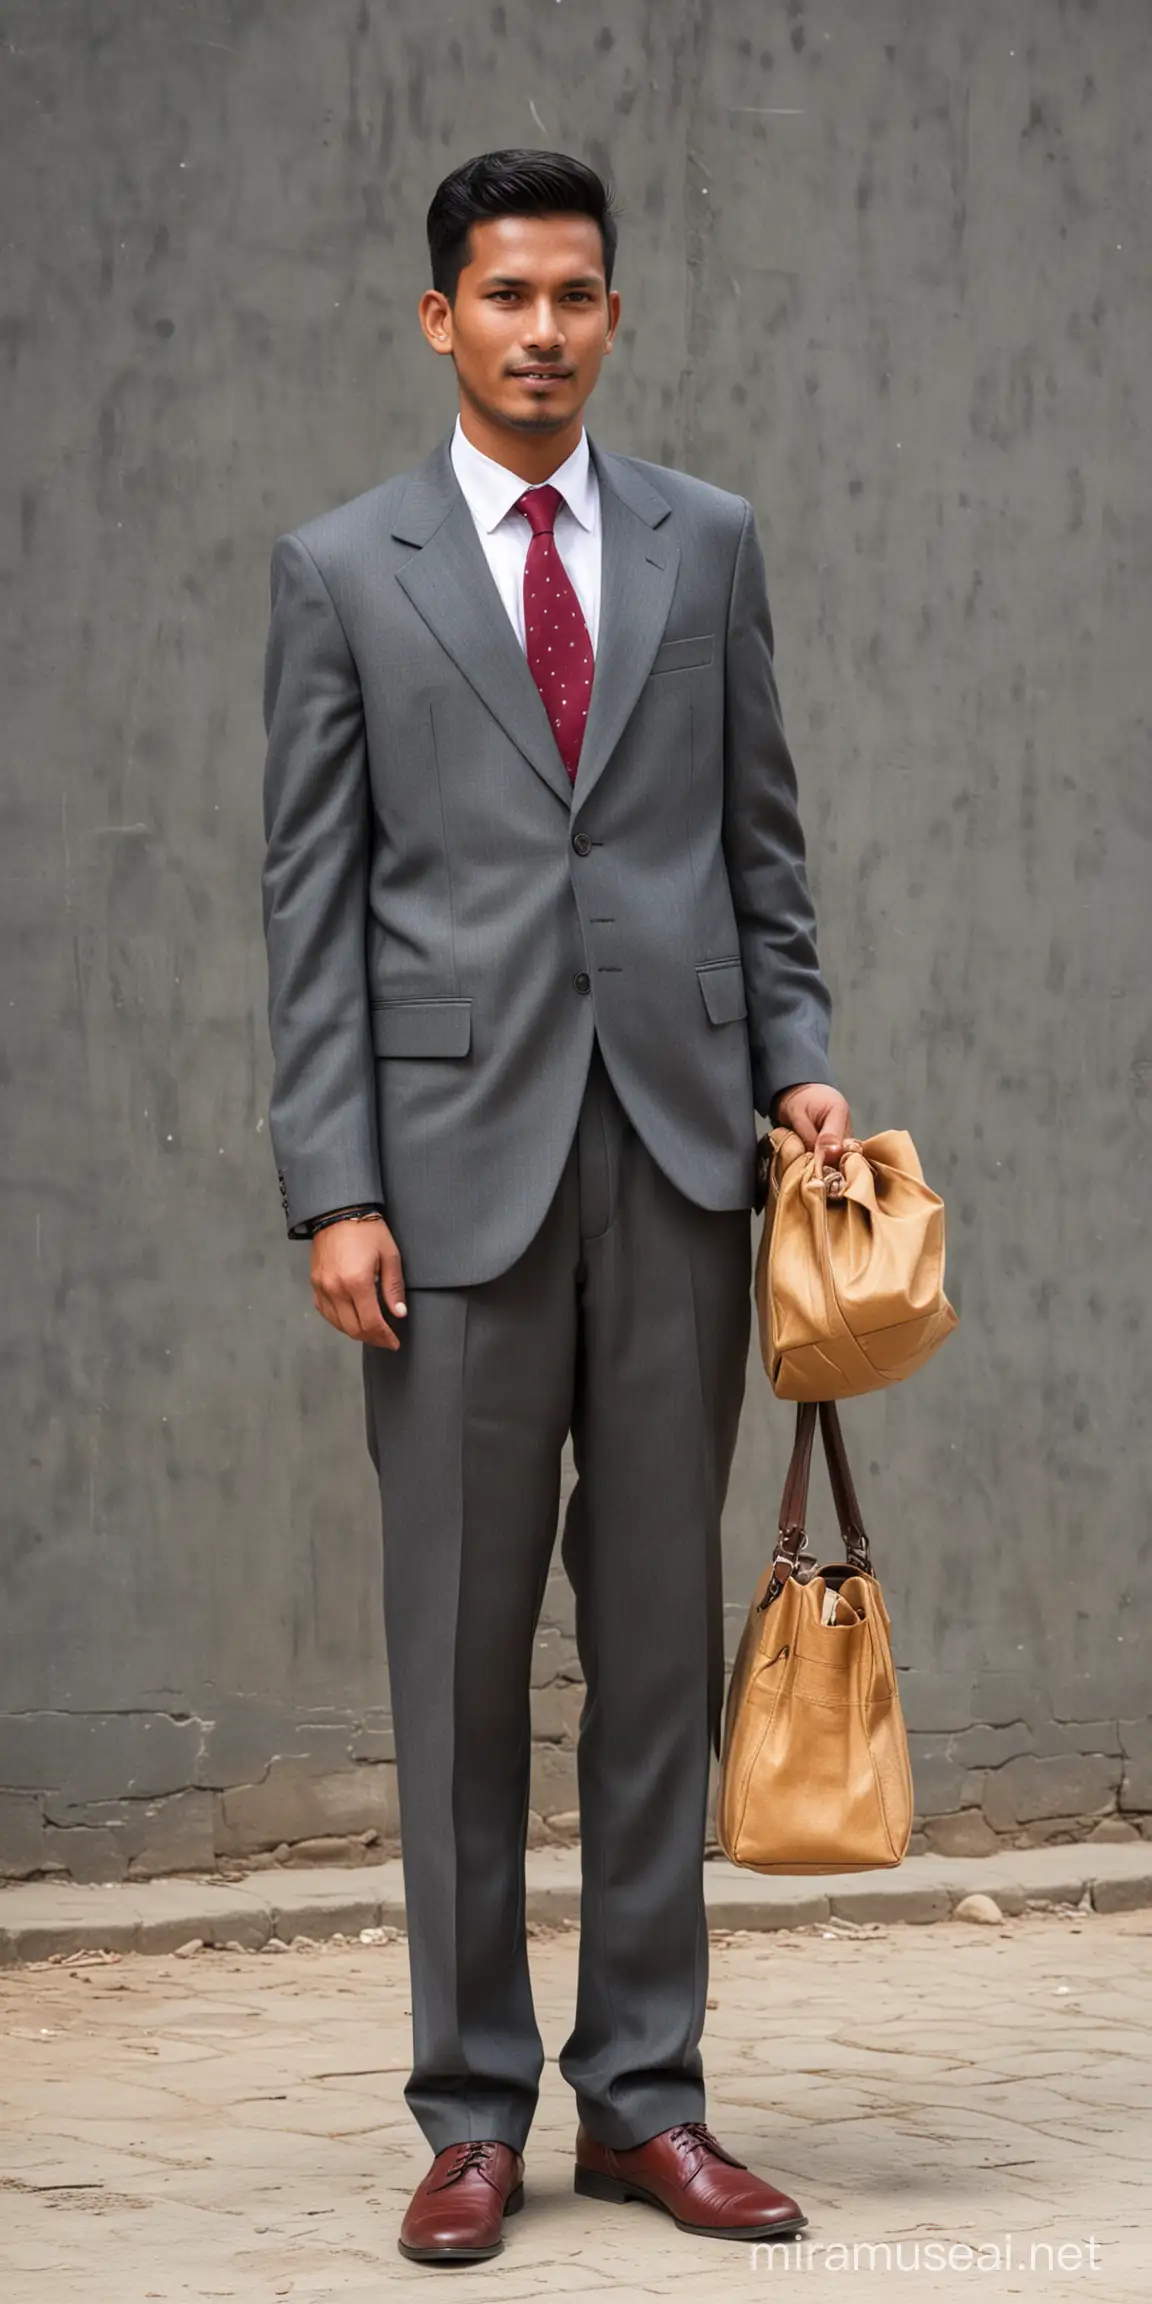 Nepali Businessman in Formal Attire Carrying a Bag